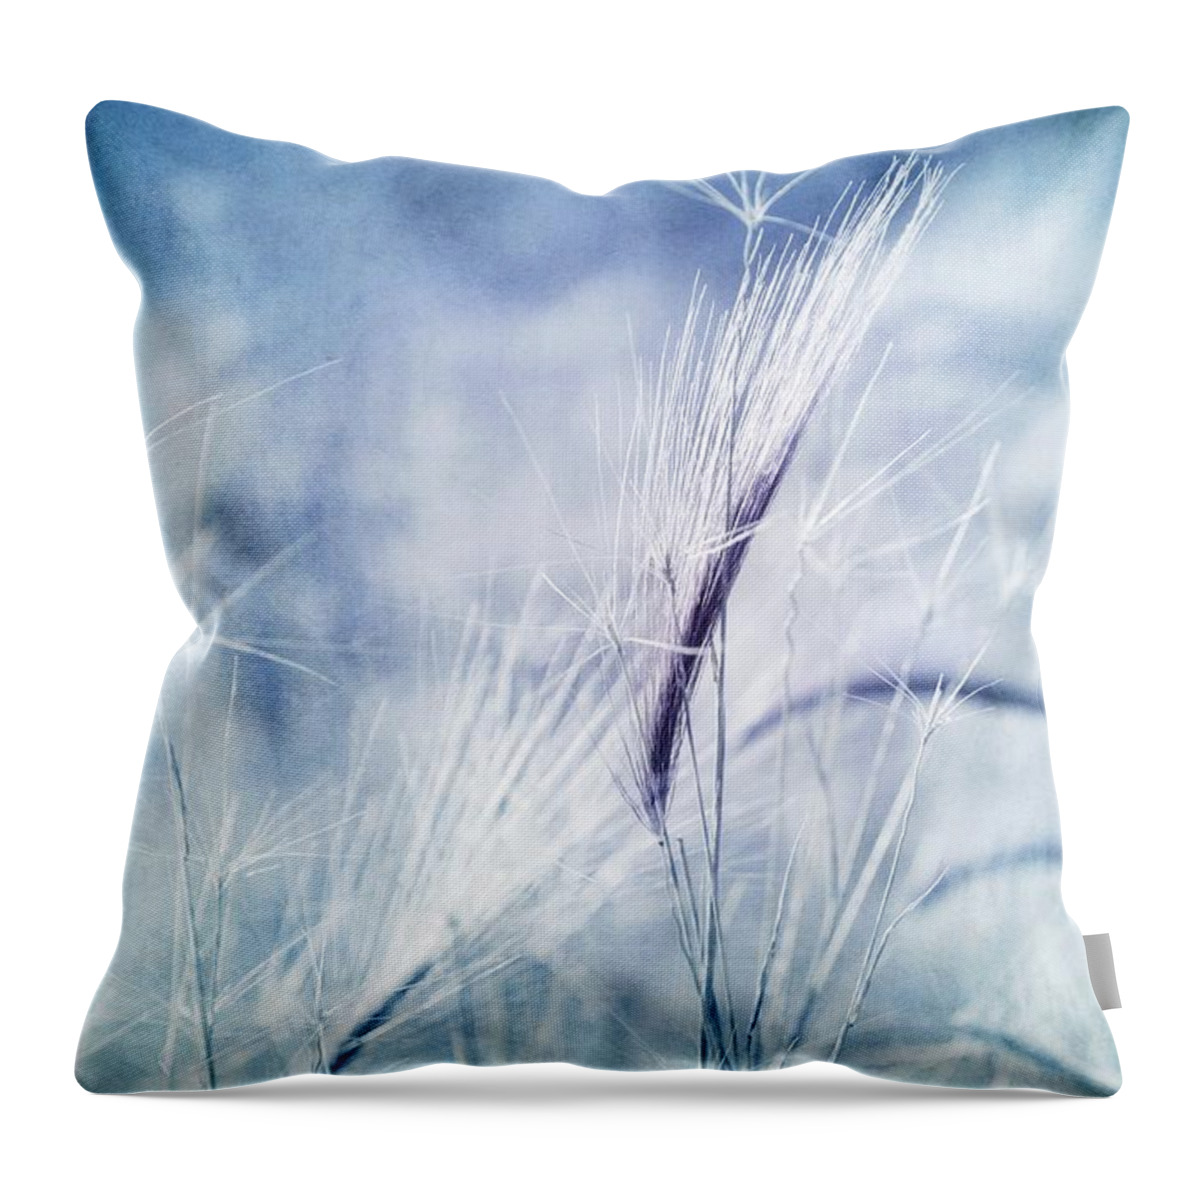 Plant Throw Pillow featuring the photograph Roadside Blues by Priska Wettstein